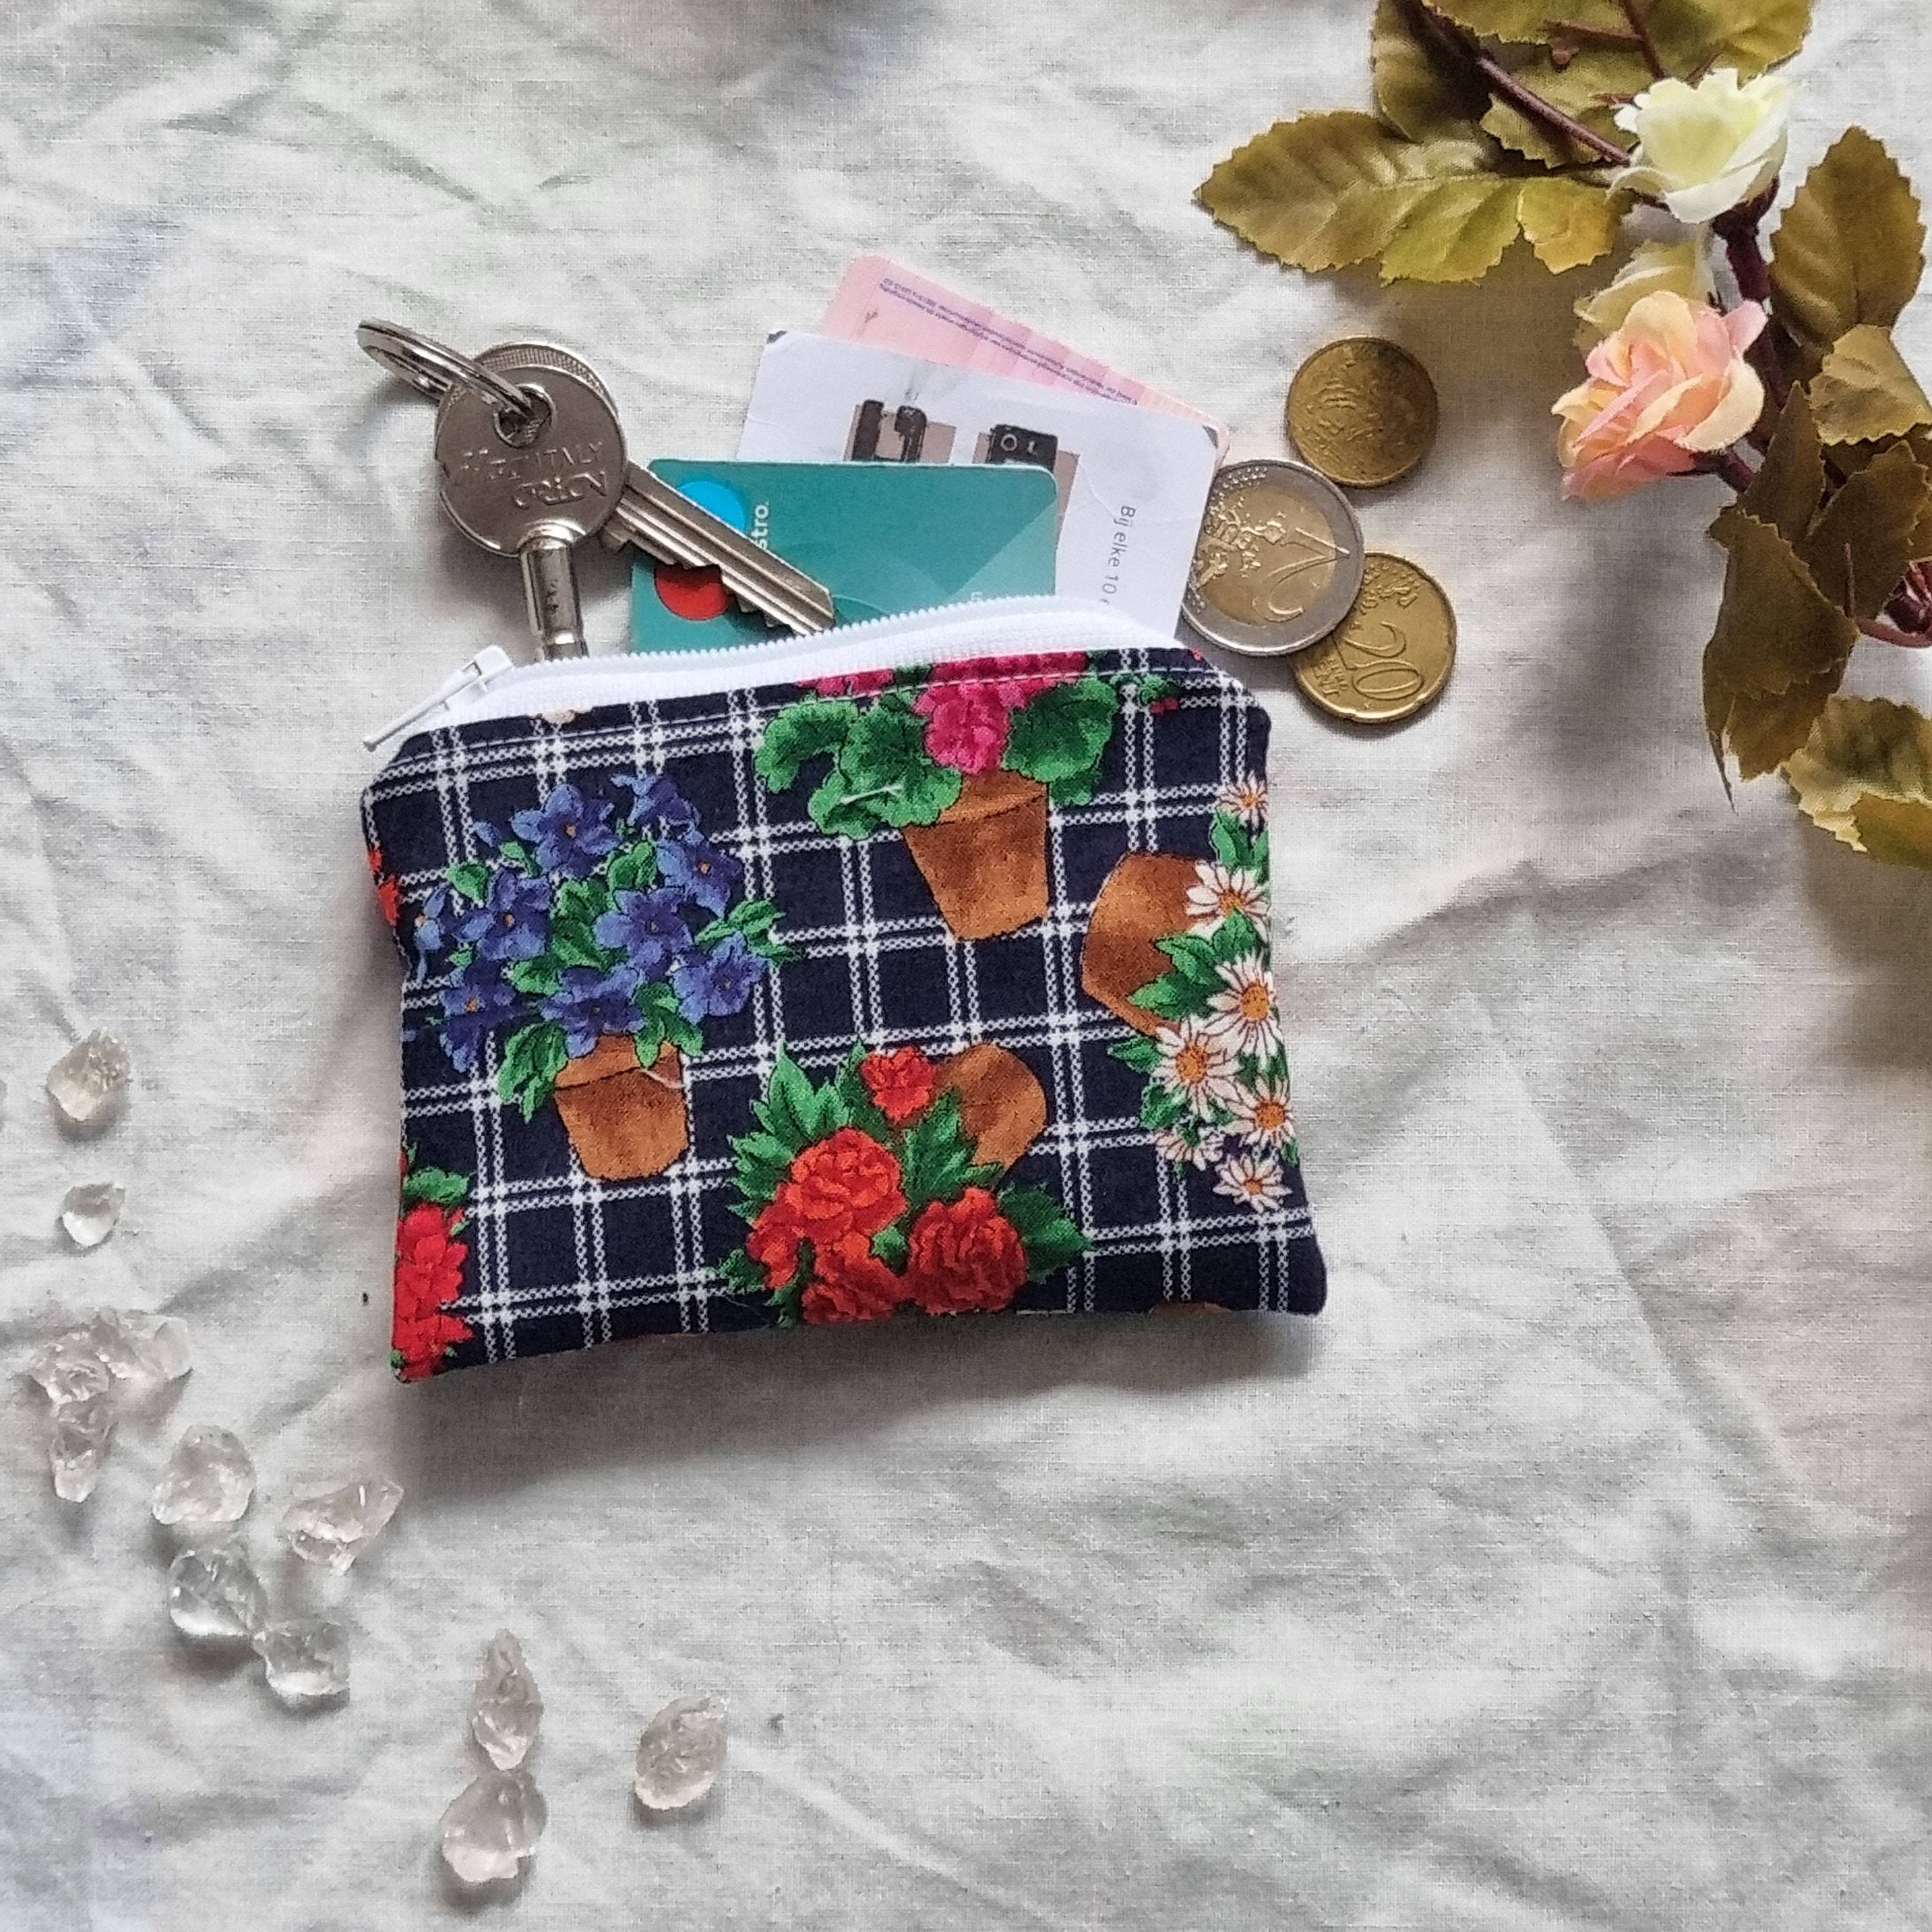 FUFU Zippered Credit Card Holder Key Ring Coin Purse Soft 